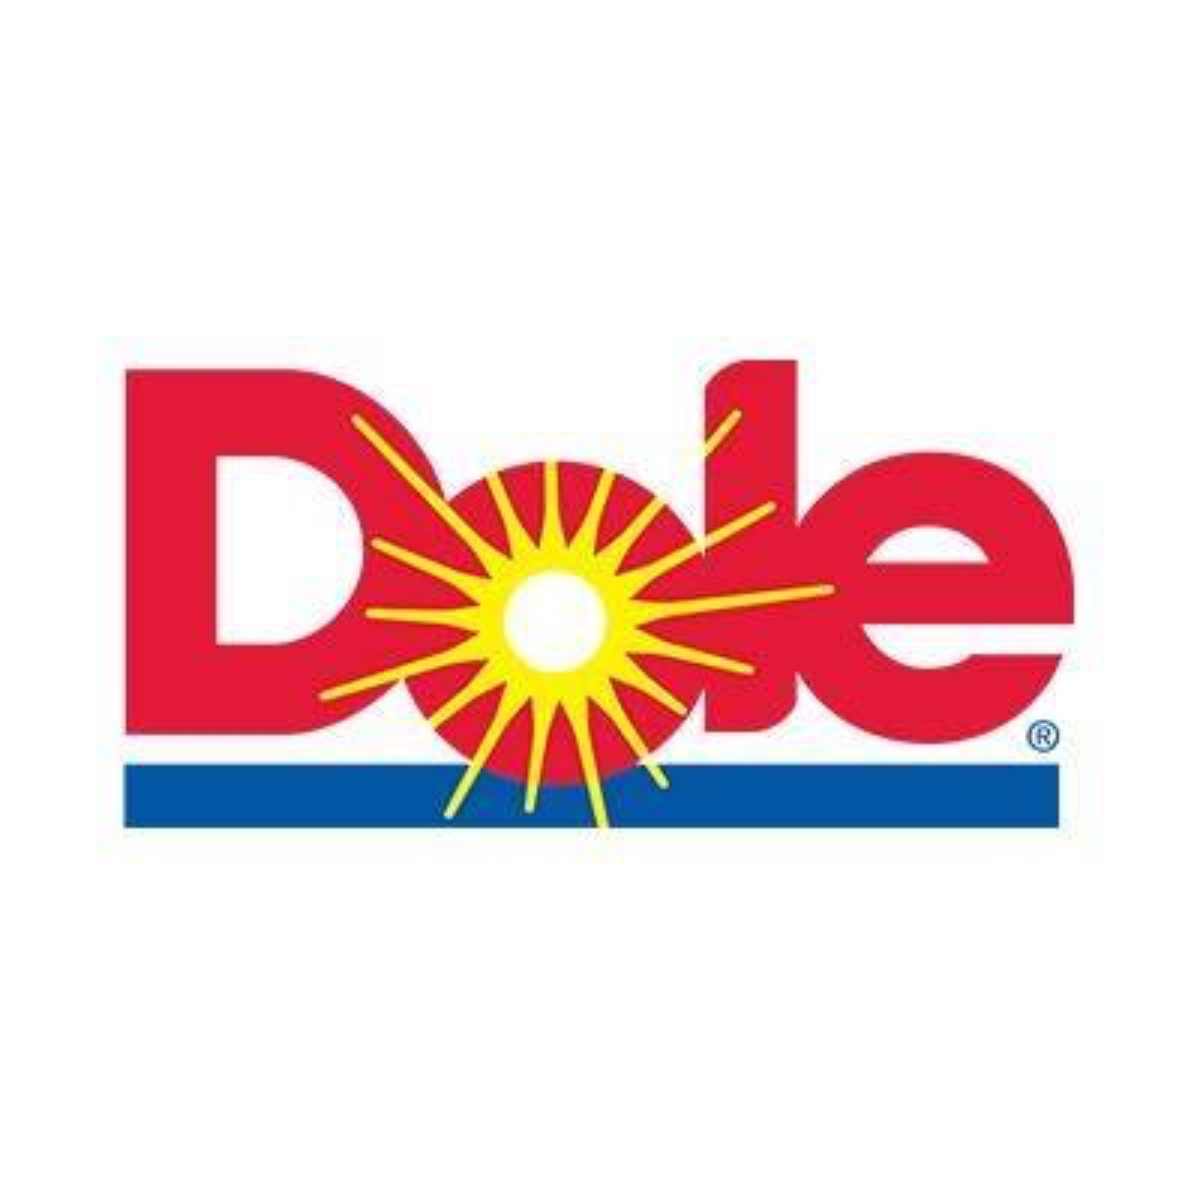 <p><strong><a class="SWhtmlLink" href="http://www.dole.com" rel="noopener">Dole</a>, Honolulu</strong></p> <p>Dole Food Company started with humble beginnings: the pineapple. Back in the early 1900s, a man named James Dole began to grow pineapples on 60 acres of land. Instead of exporting the fresh fruit, he packed the fruit in cans. He was wildly successful and they expanded their portfolio, growing to a multi-billion-dollar company.</p>